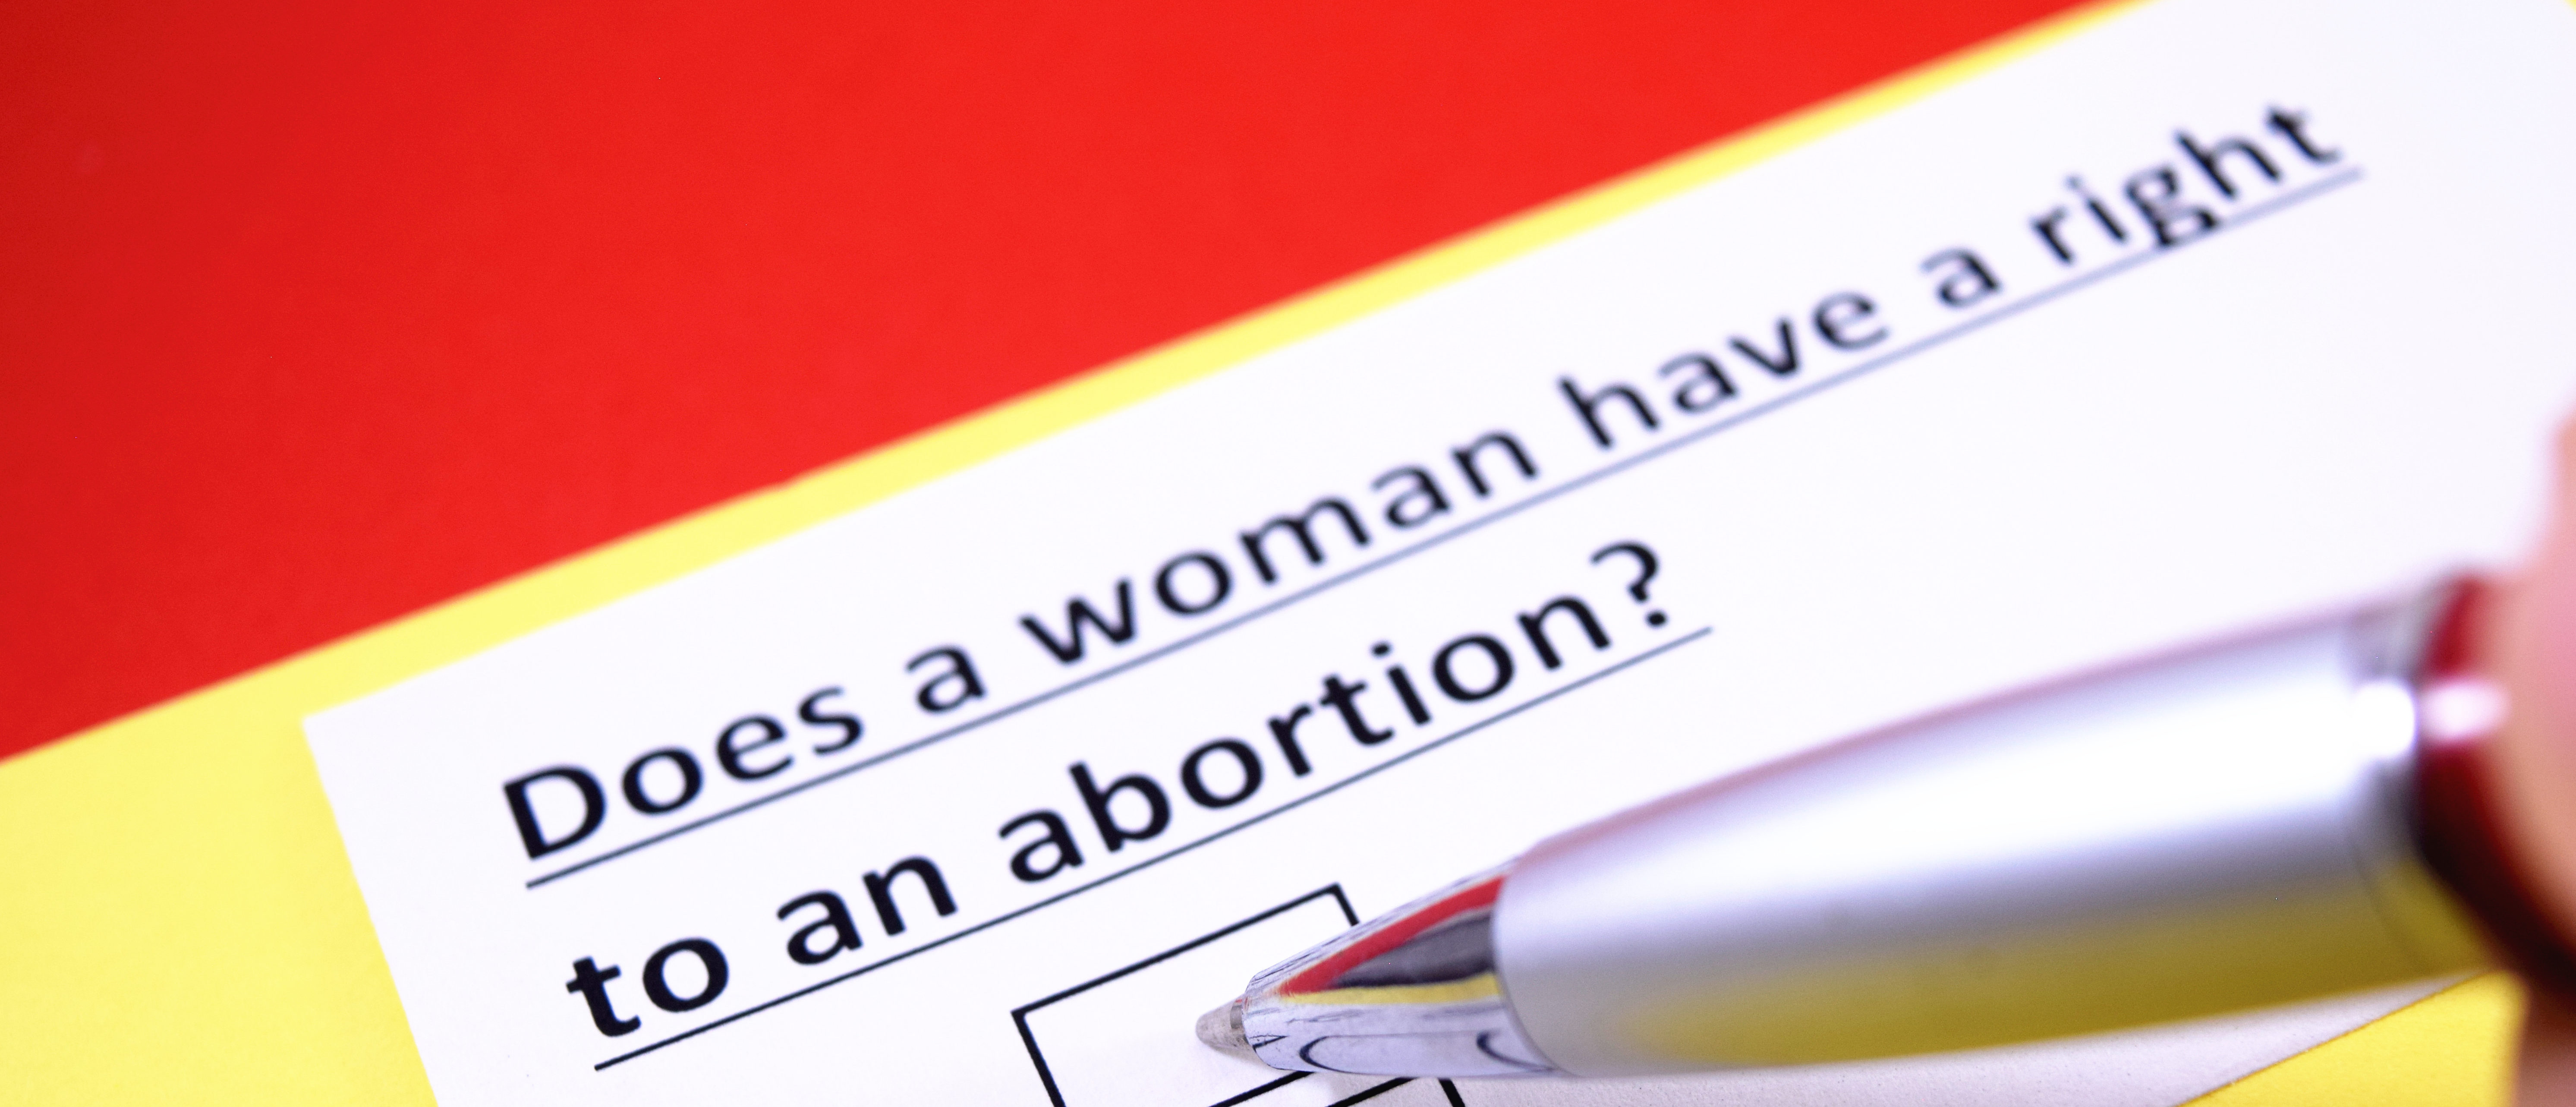 Alabama And West Virginia To Vote On Stripping Abortion Protections From State ...